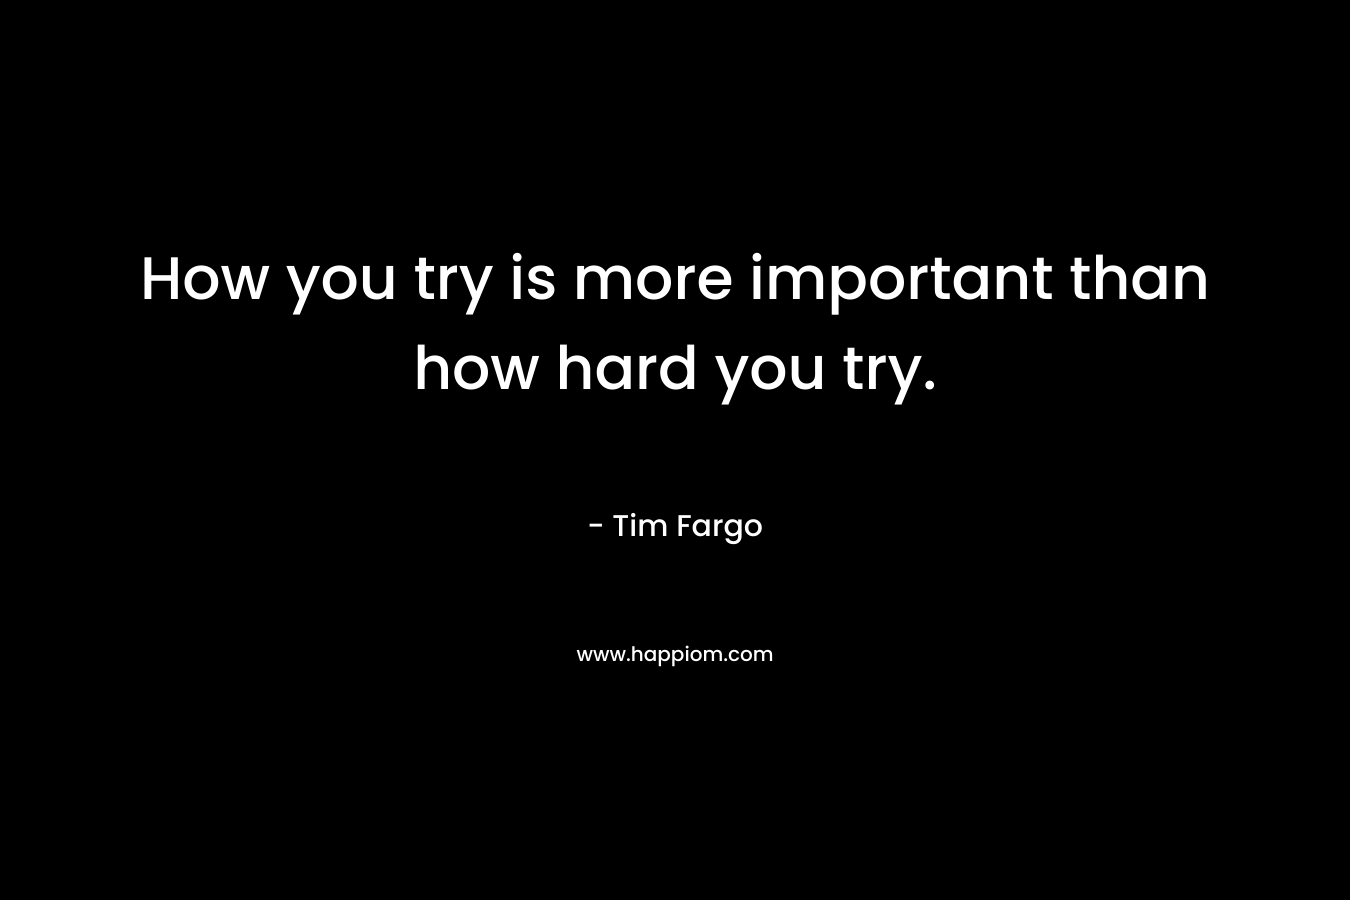 How you try is more important than how hard you try. – Tim Fargo